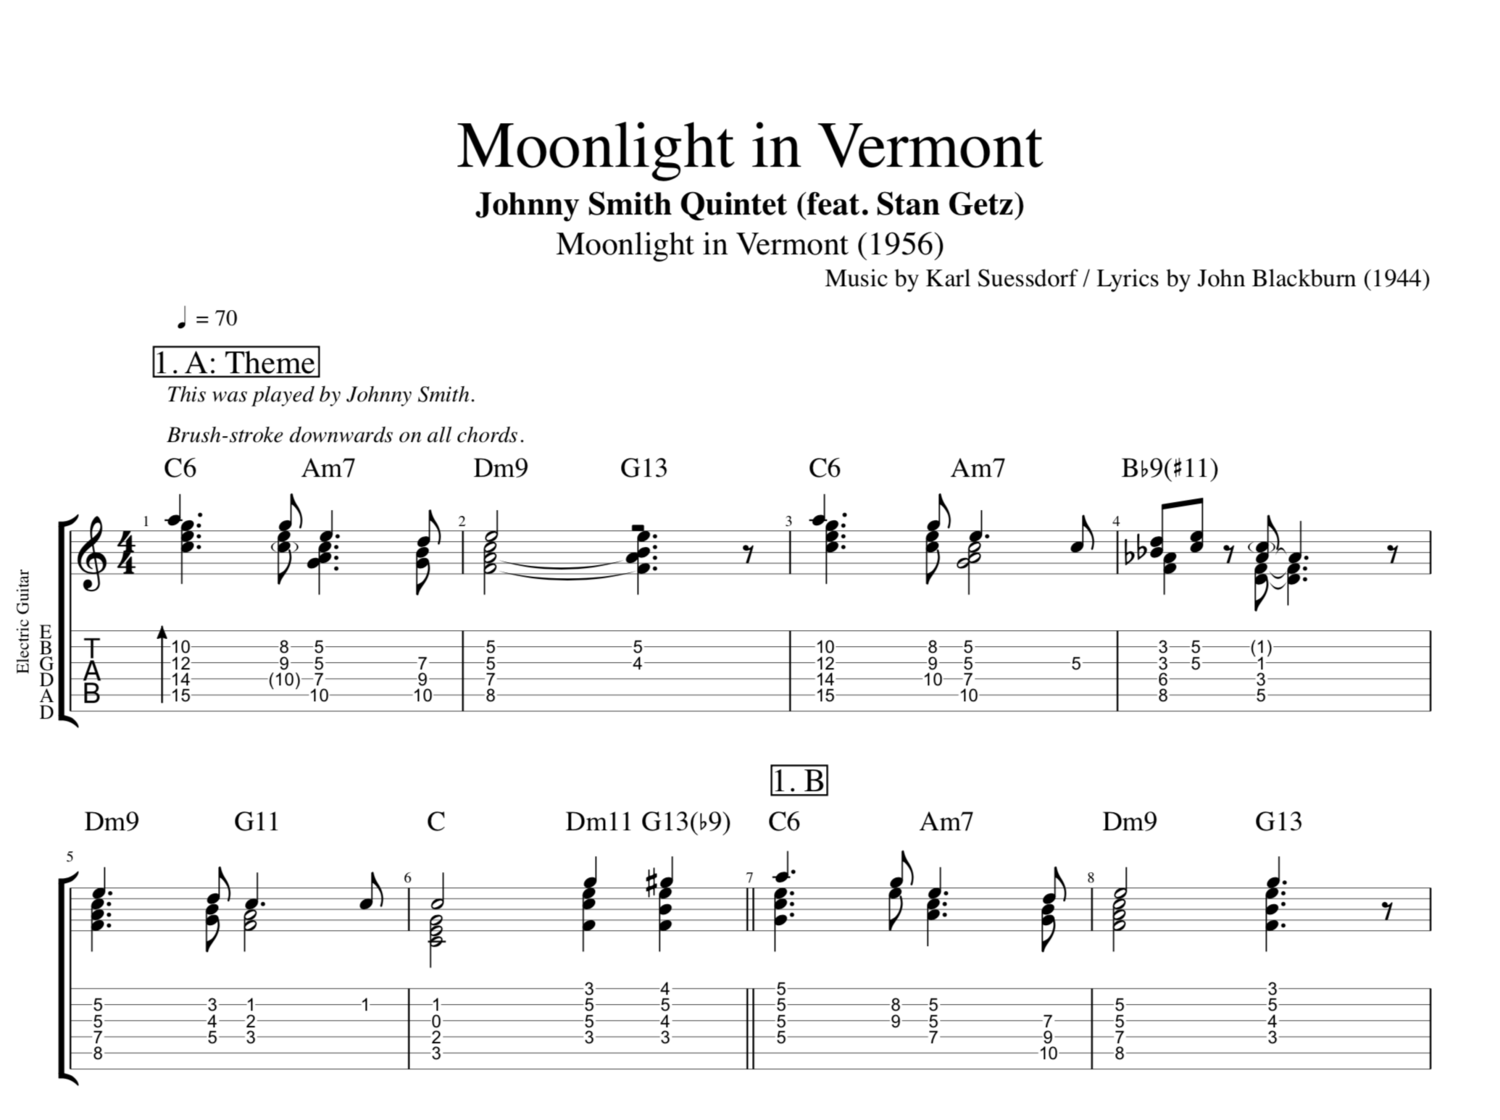 Guitar - II. 7 et 8 CORDES, Guitar&Bass, impro/compo, investigations / 5 Fingers No Nail Moonlight+in+Vermont+G+Johnny+Smith+Stan+Getz+guitar+tab+tabs+chords+double+bass+jazz+saxophone+tenor+transcription+chords+sheet+music